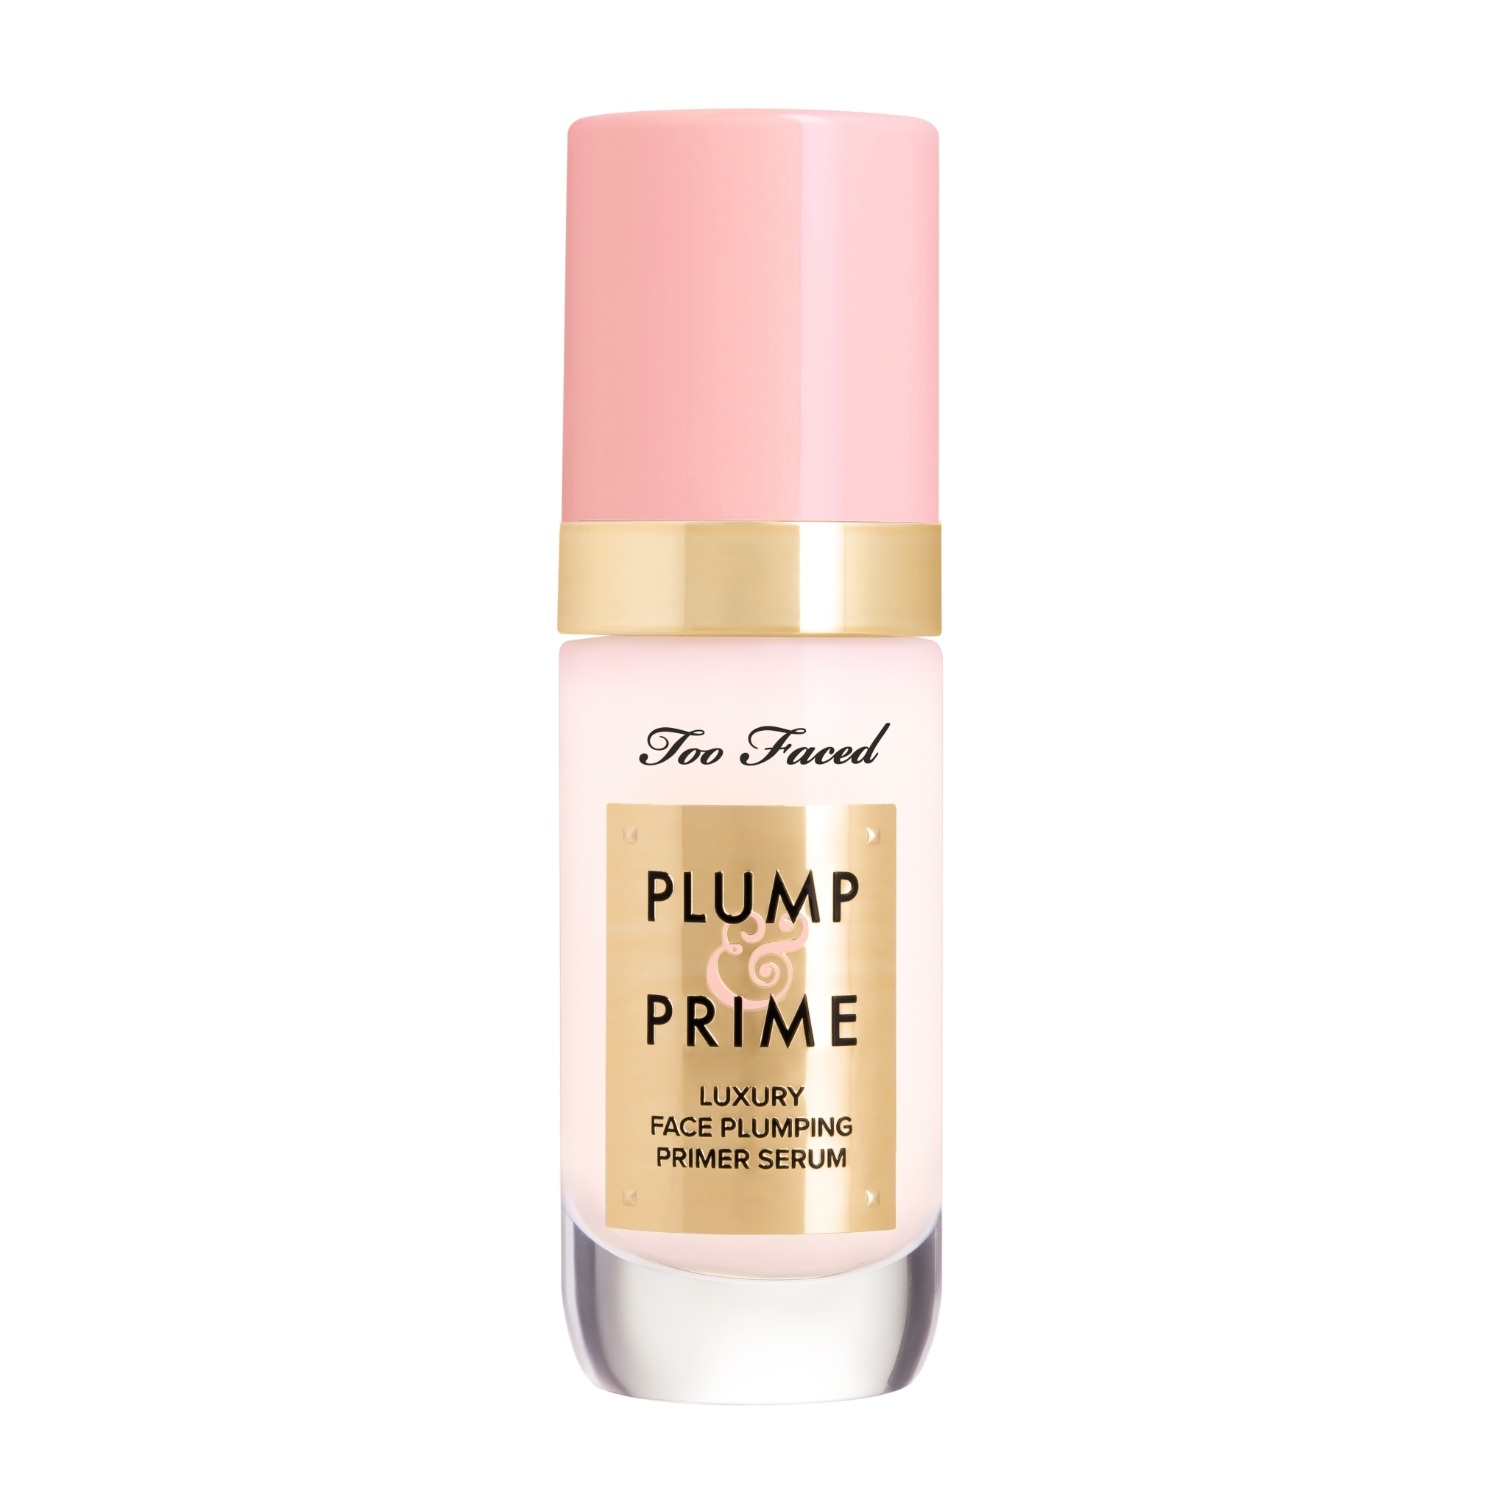 Too Faced | Too Faced Plump & Prime Luxury Face Plumping Primer Serum (30ml)